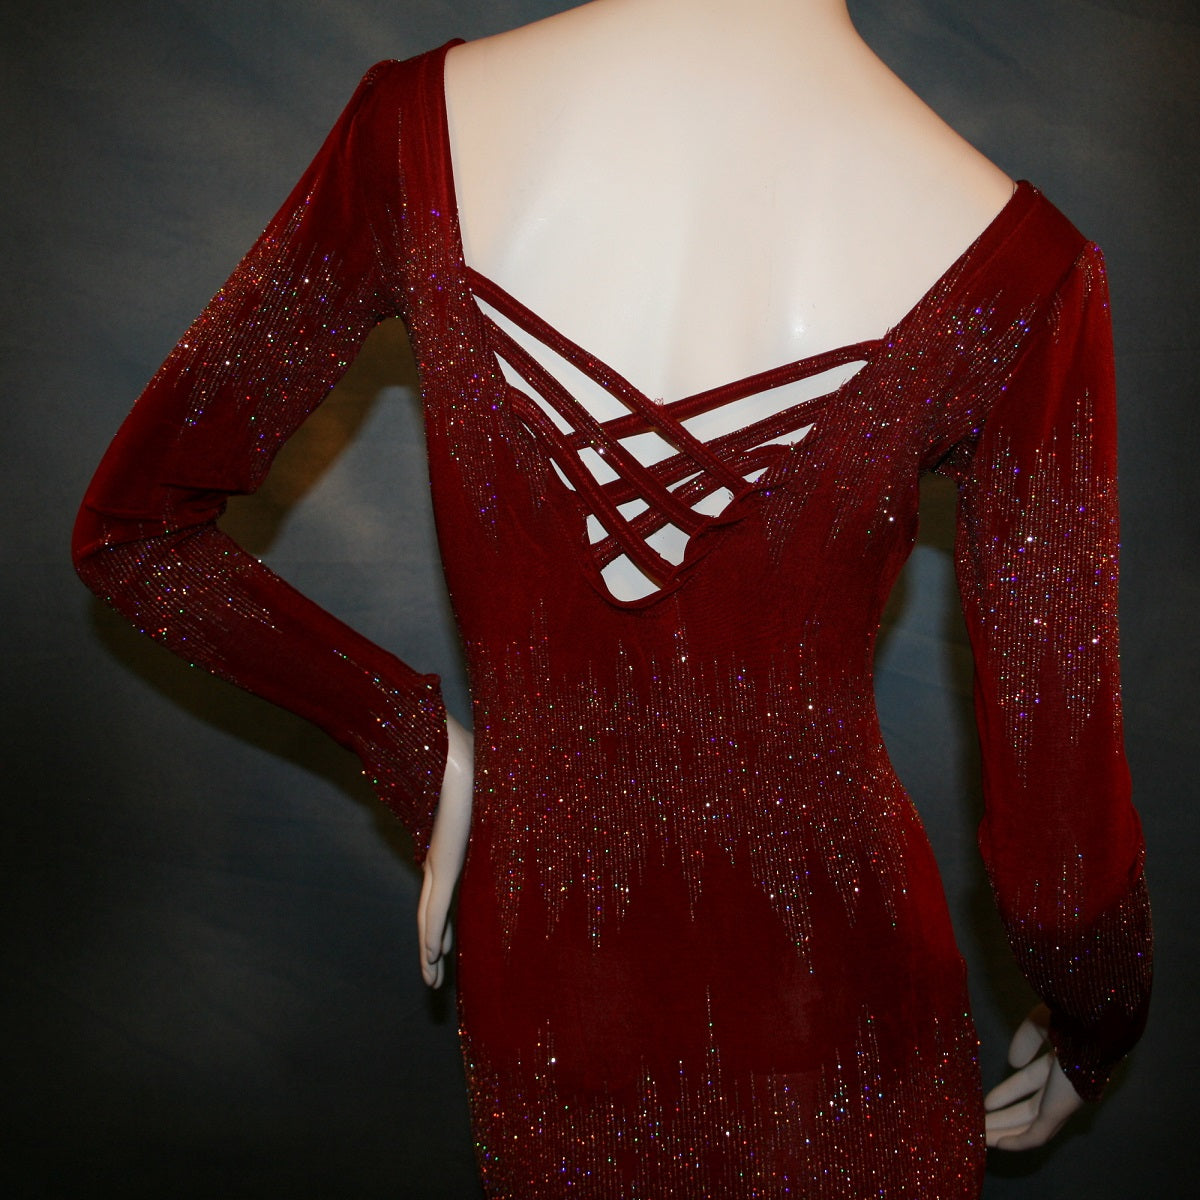 close back view of Deep scarlette red Latin/rhythm/tango dress created in glitter slinky with an awesome electrifying glitter pattern features lattice detailing in the back, long sleeves with Swarovski hand beading in the skirt sides.